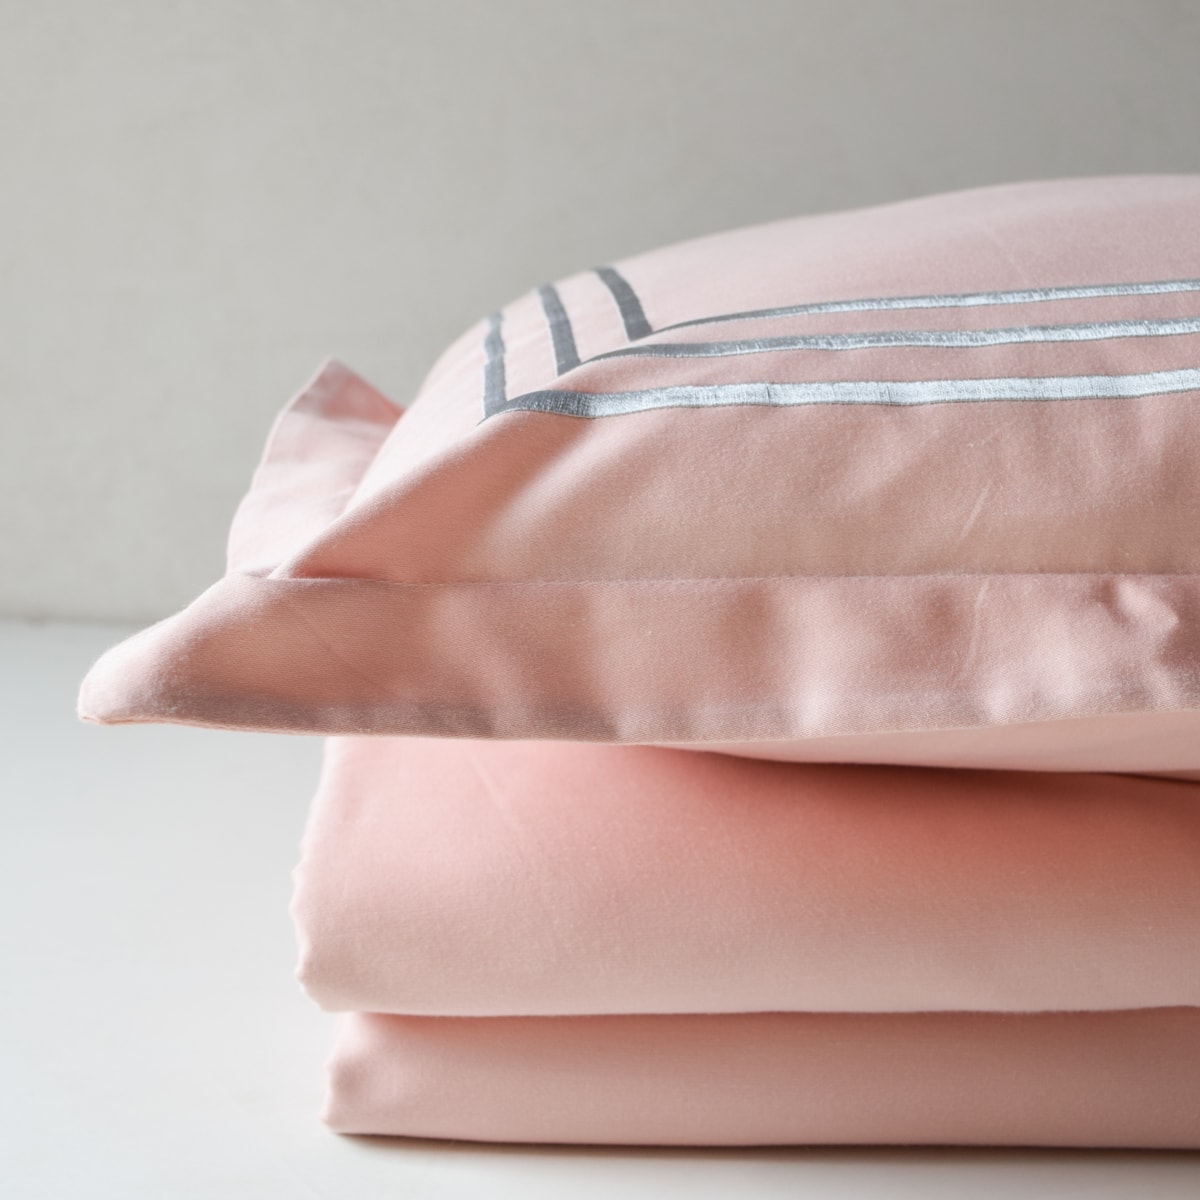 Parallel Coral Peach Cotton Sateen Bed Sheet by Veda Homes